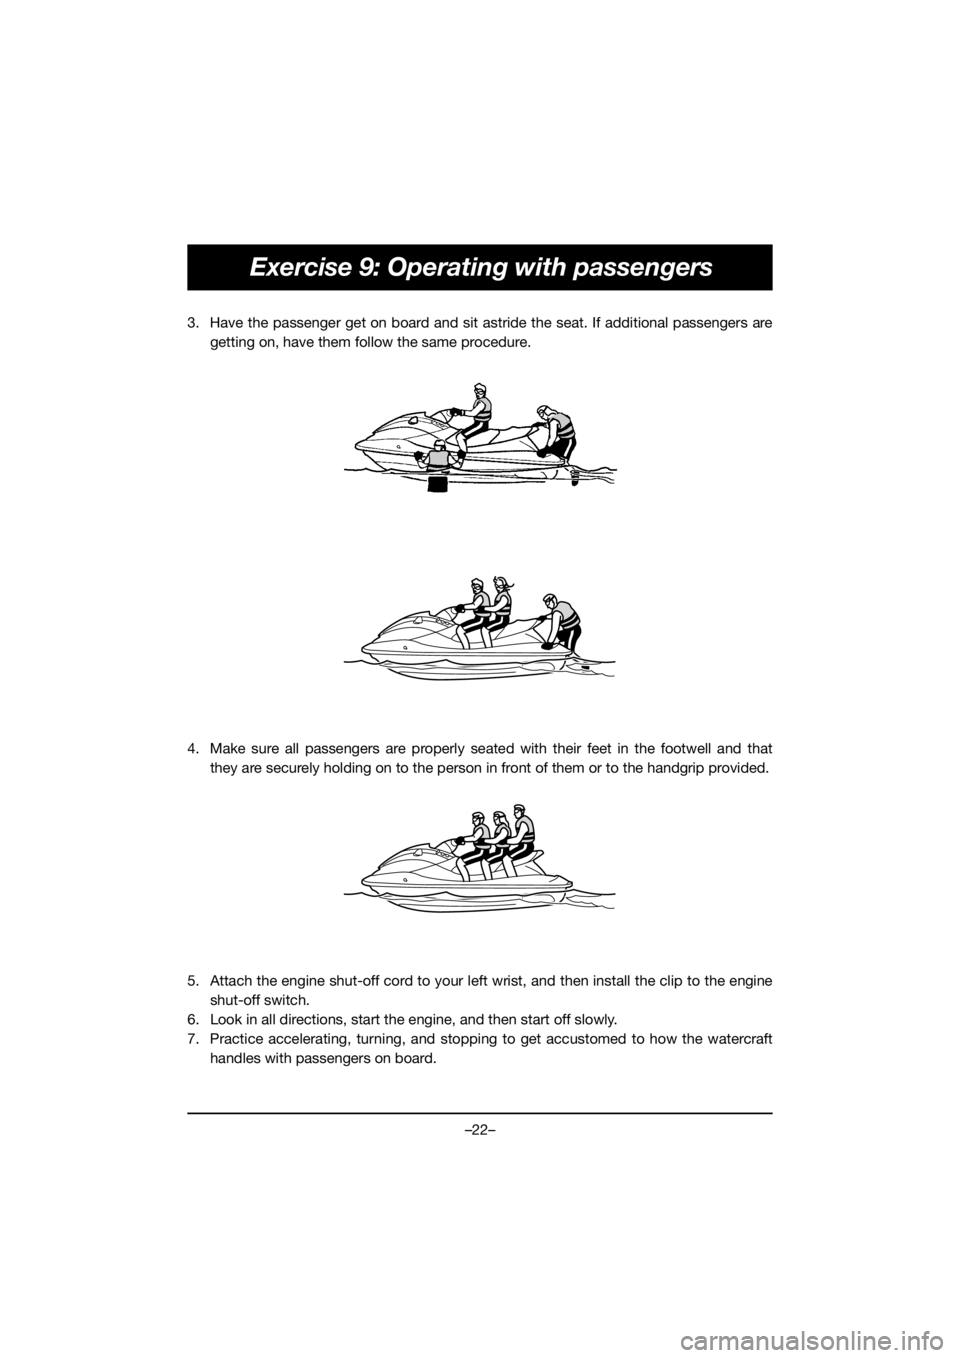 YAMAHA FJR1300 2020  Betriebsanleitungen (in German) –22–
Exercise 9: Operating with passengers
3. Have the passenger get on board and sit astride the seat. If additional passengers are
getting on, have them follow the same procedure. 
4. Make sure 